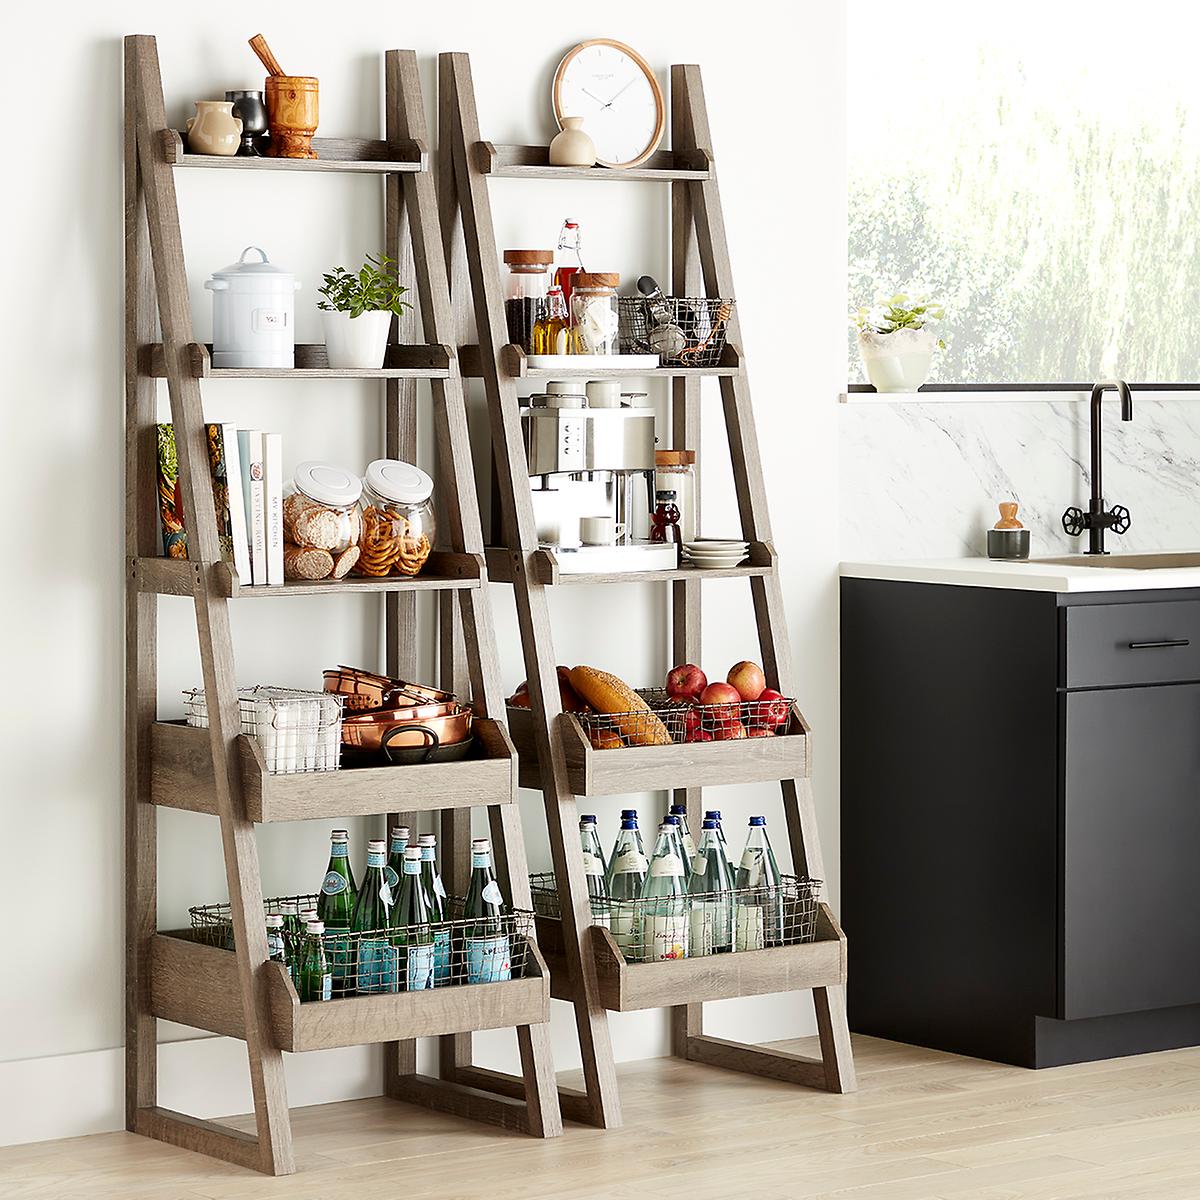 Rustic Driftwood Encore Narrow Bookshelf The Container Store